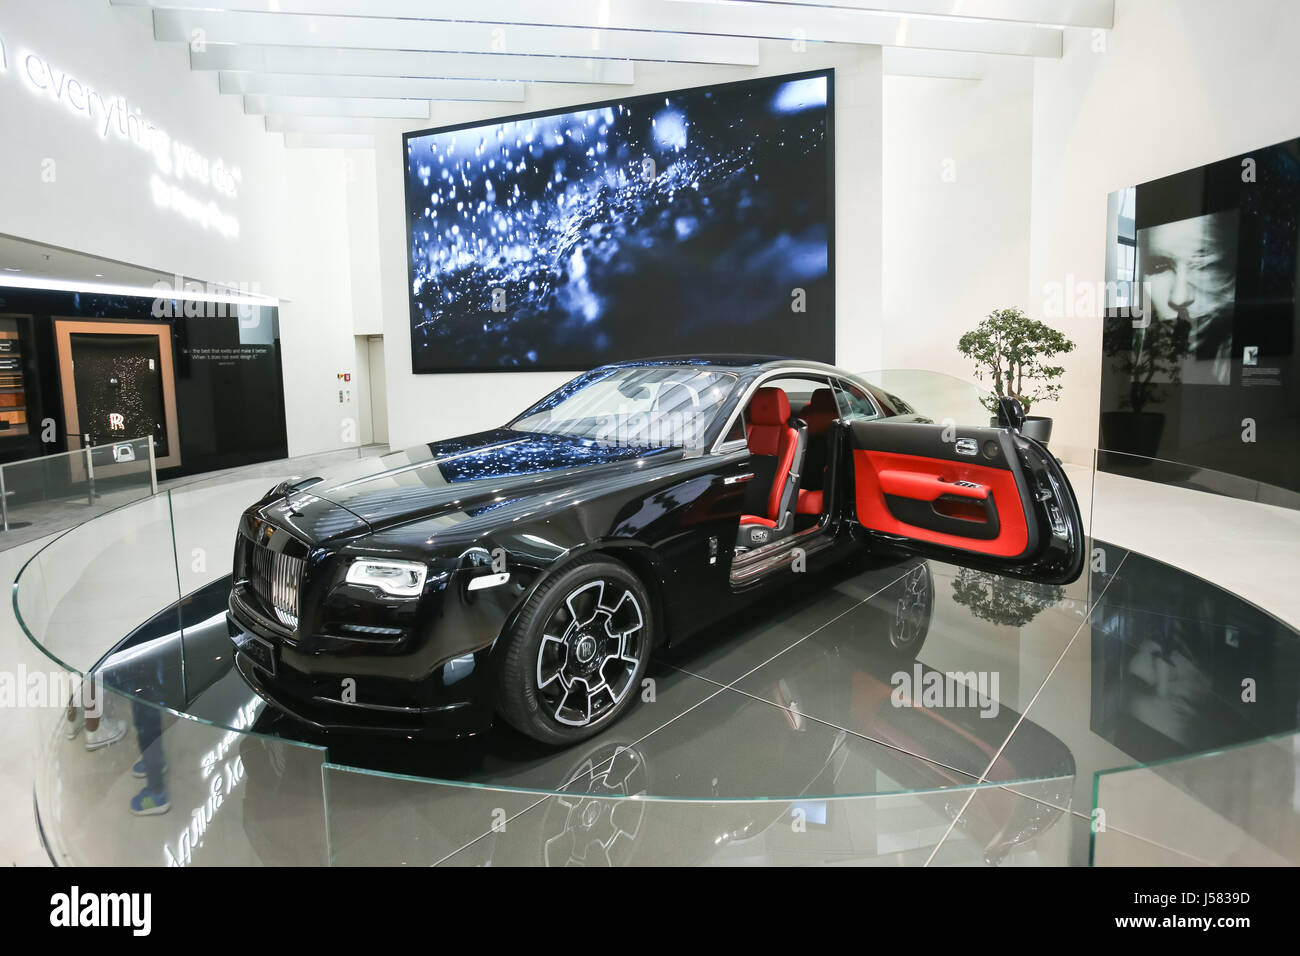 MUNICH, GERMANY - MAY 6, 2017 : The exhibited Rolls Royce automobile in the BMW Welt exhibition center in Munich, Germany. Stock Photo